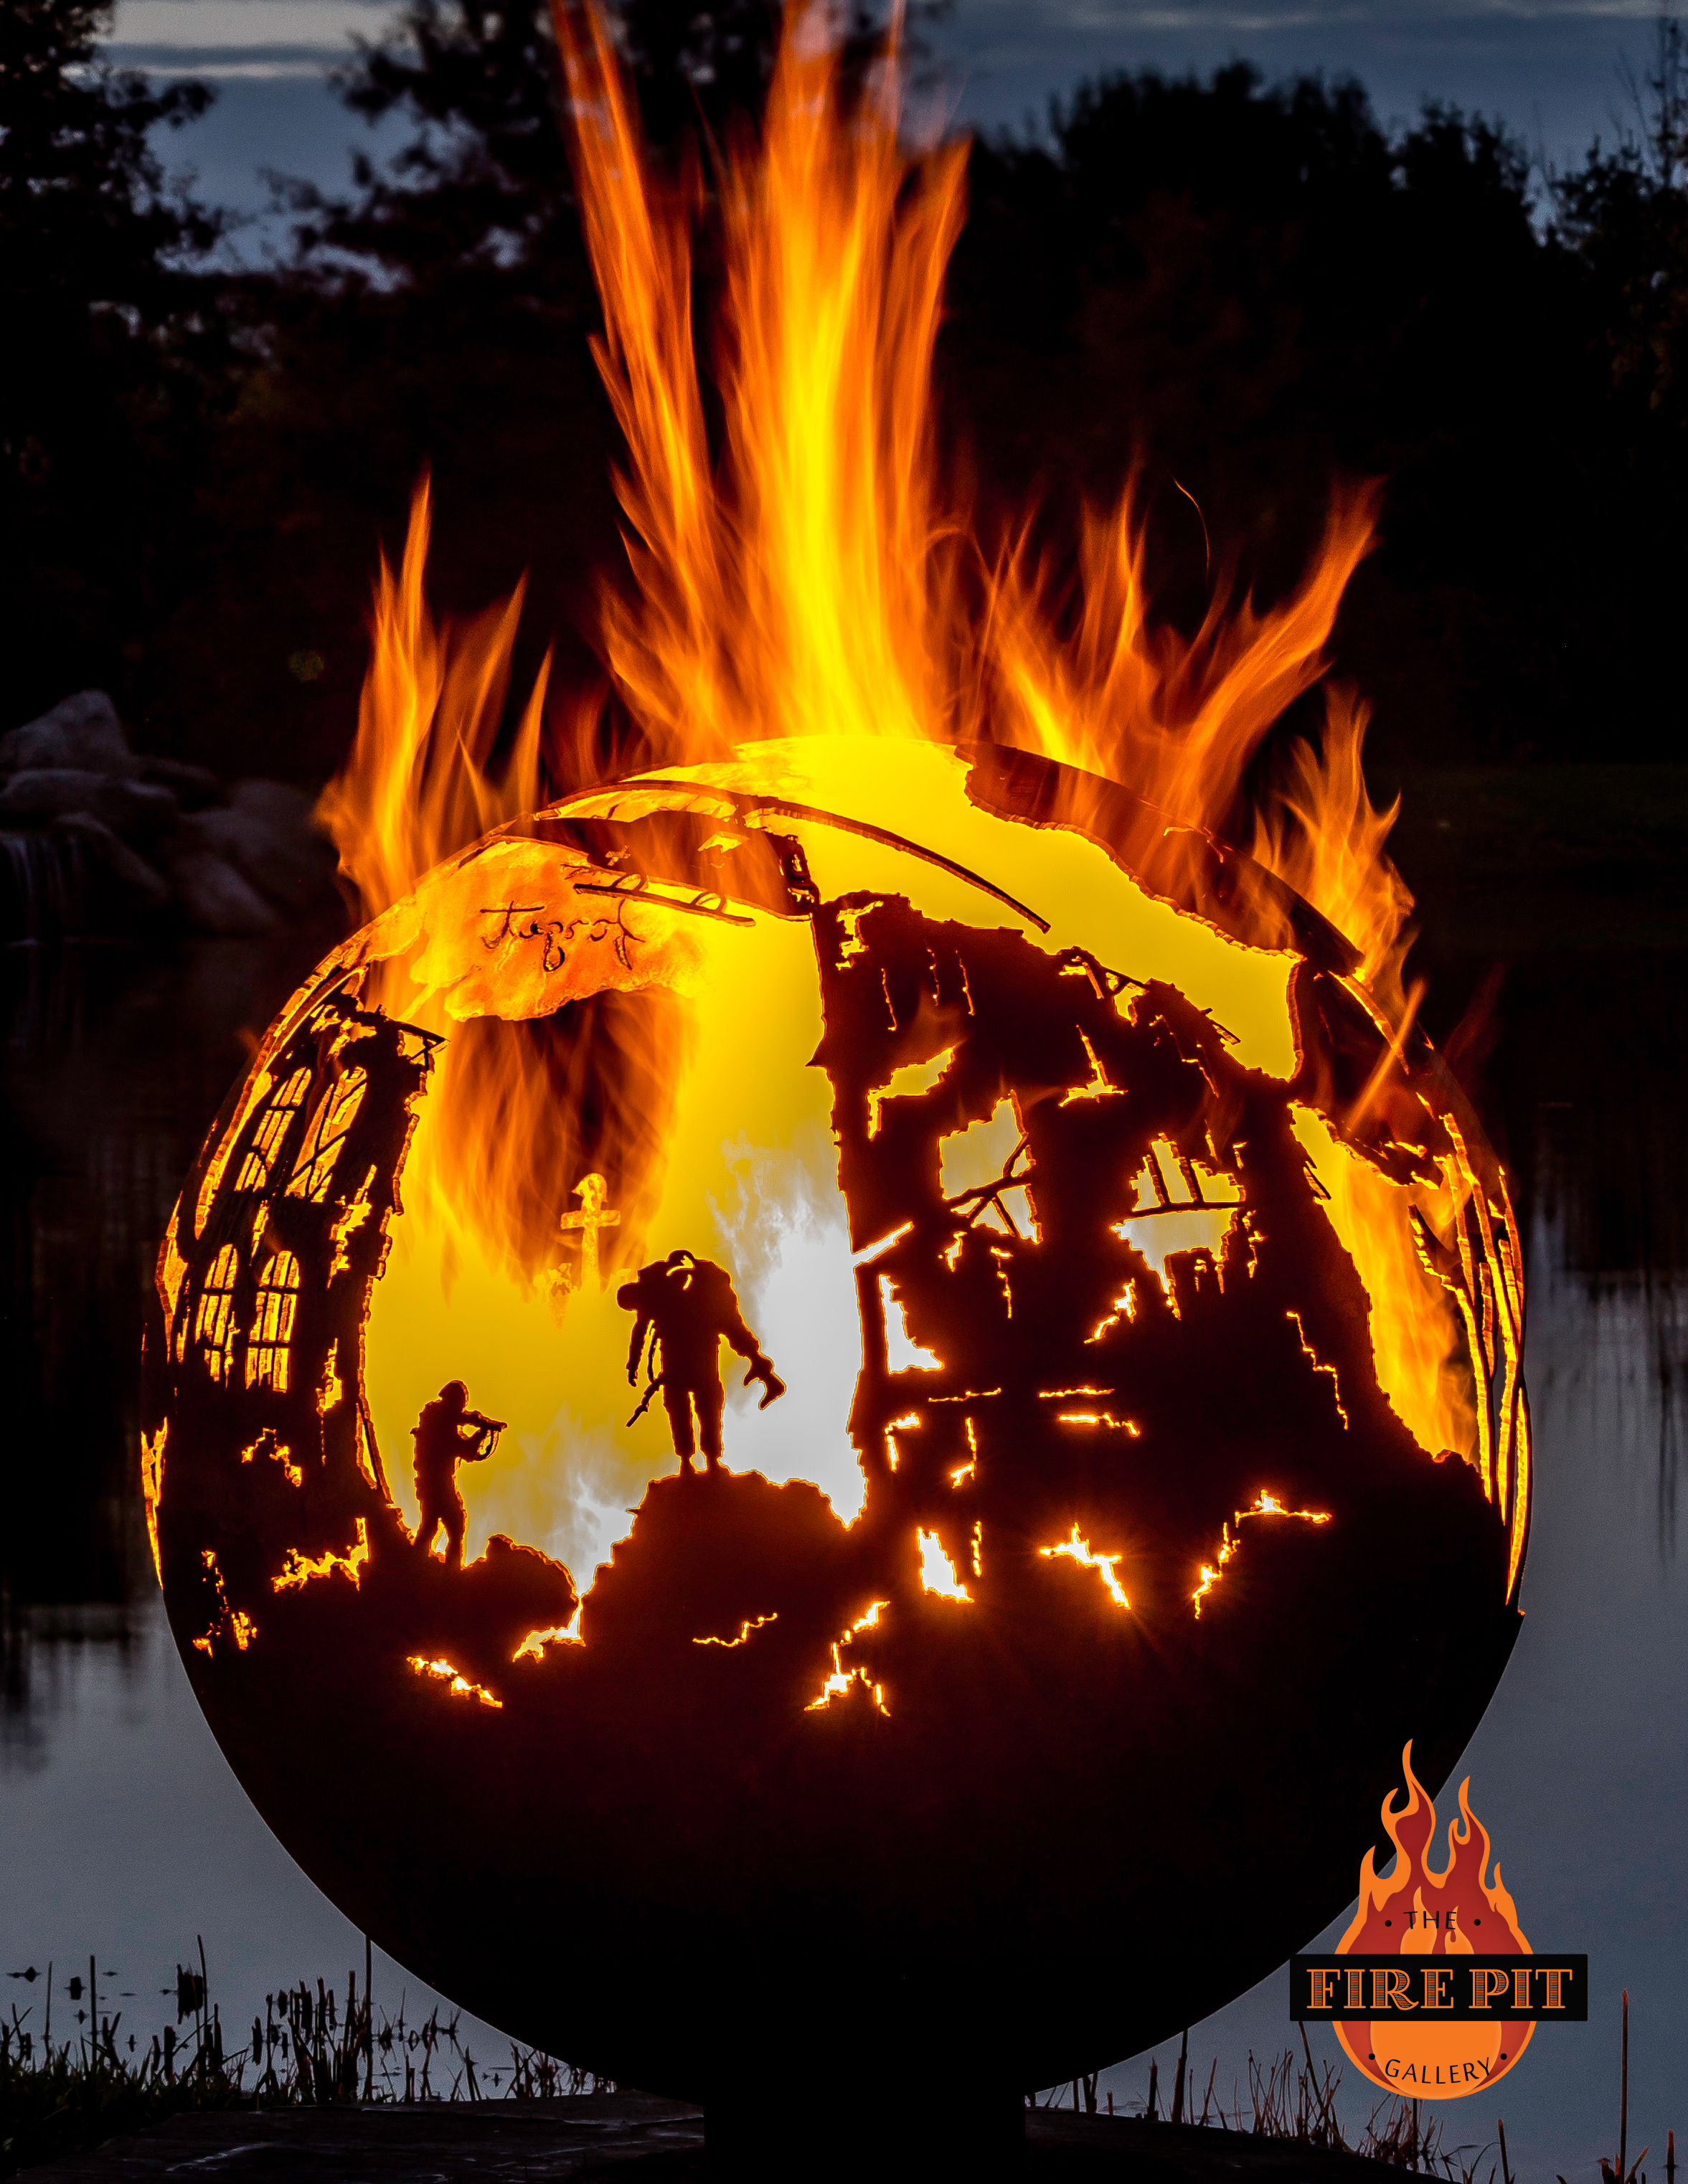 Lest We Forget - Remembrance Day Fire Pit Sphere | The Fire Pit ...